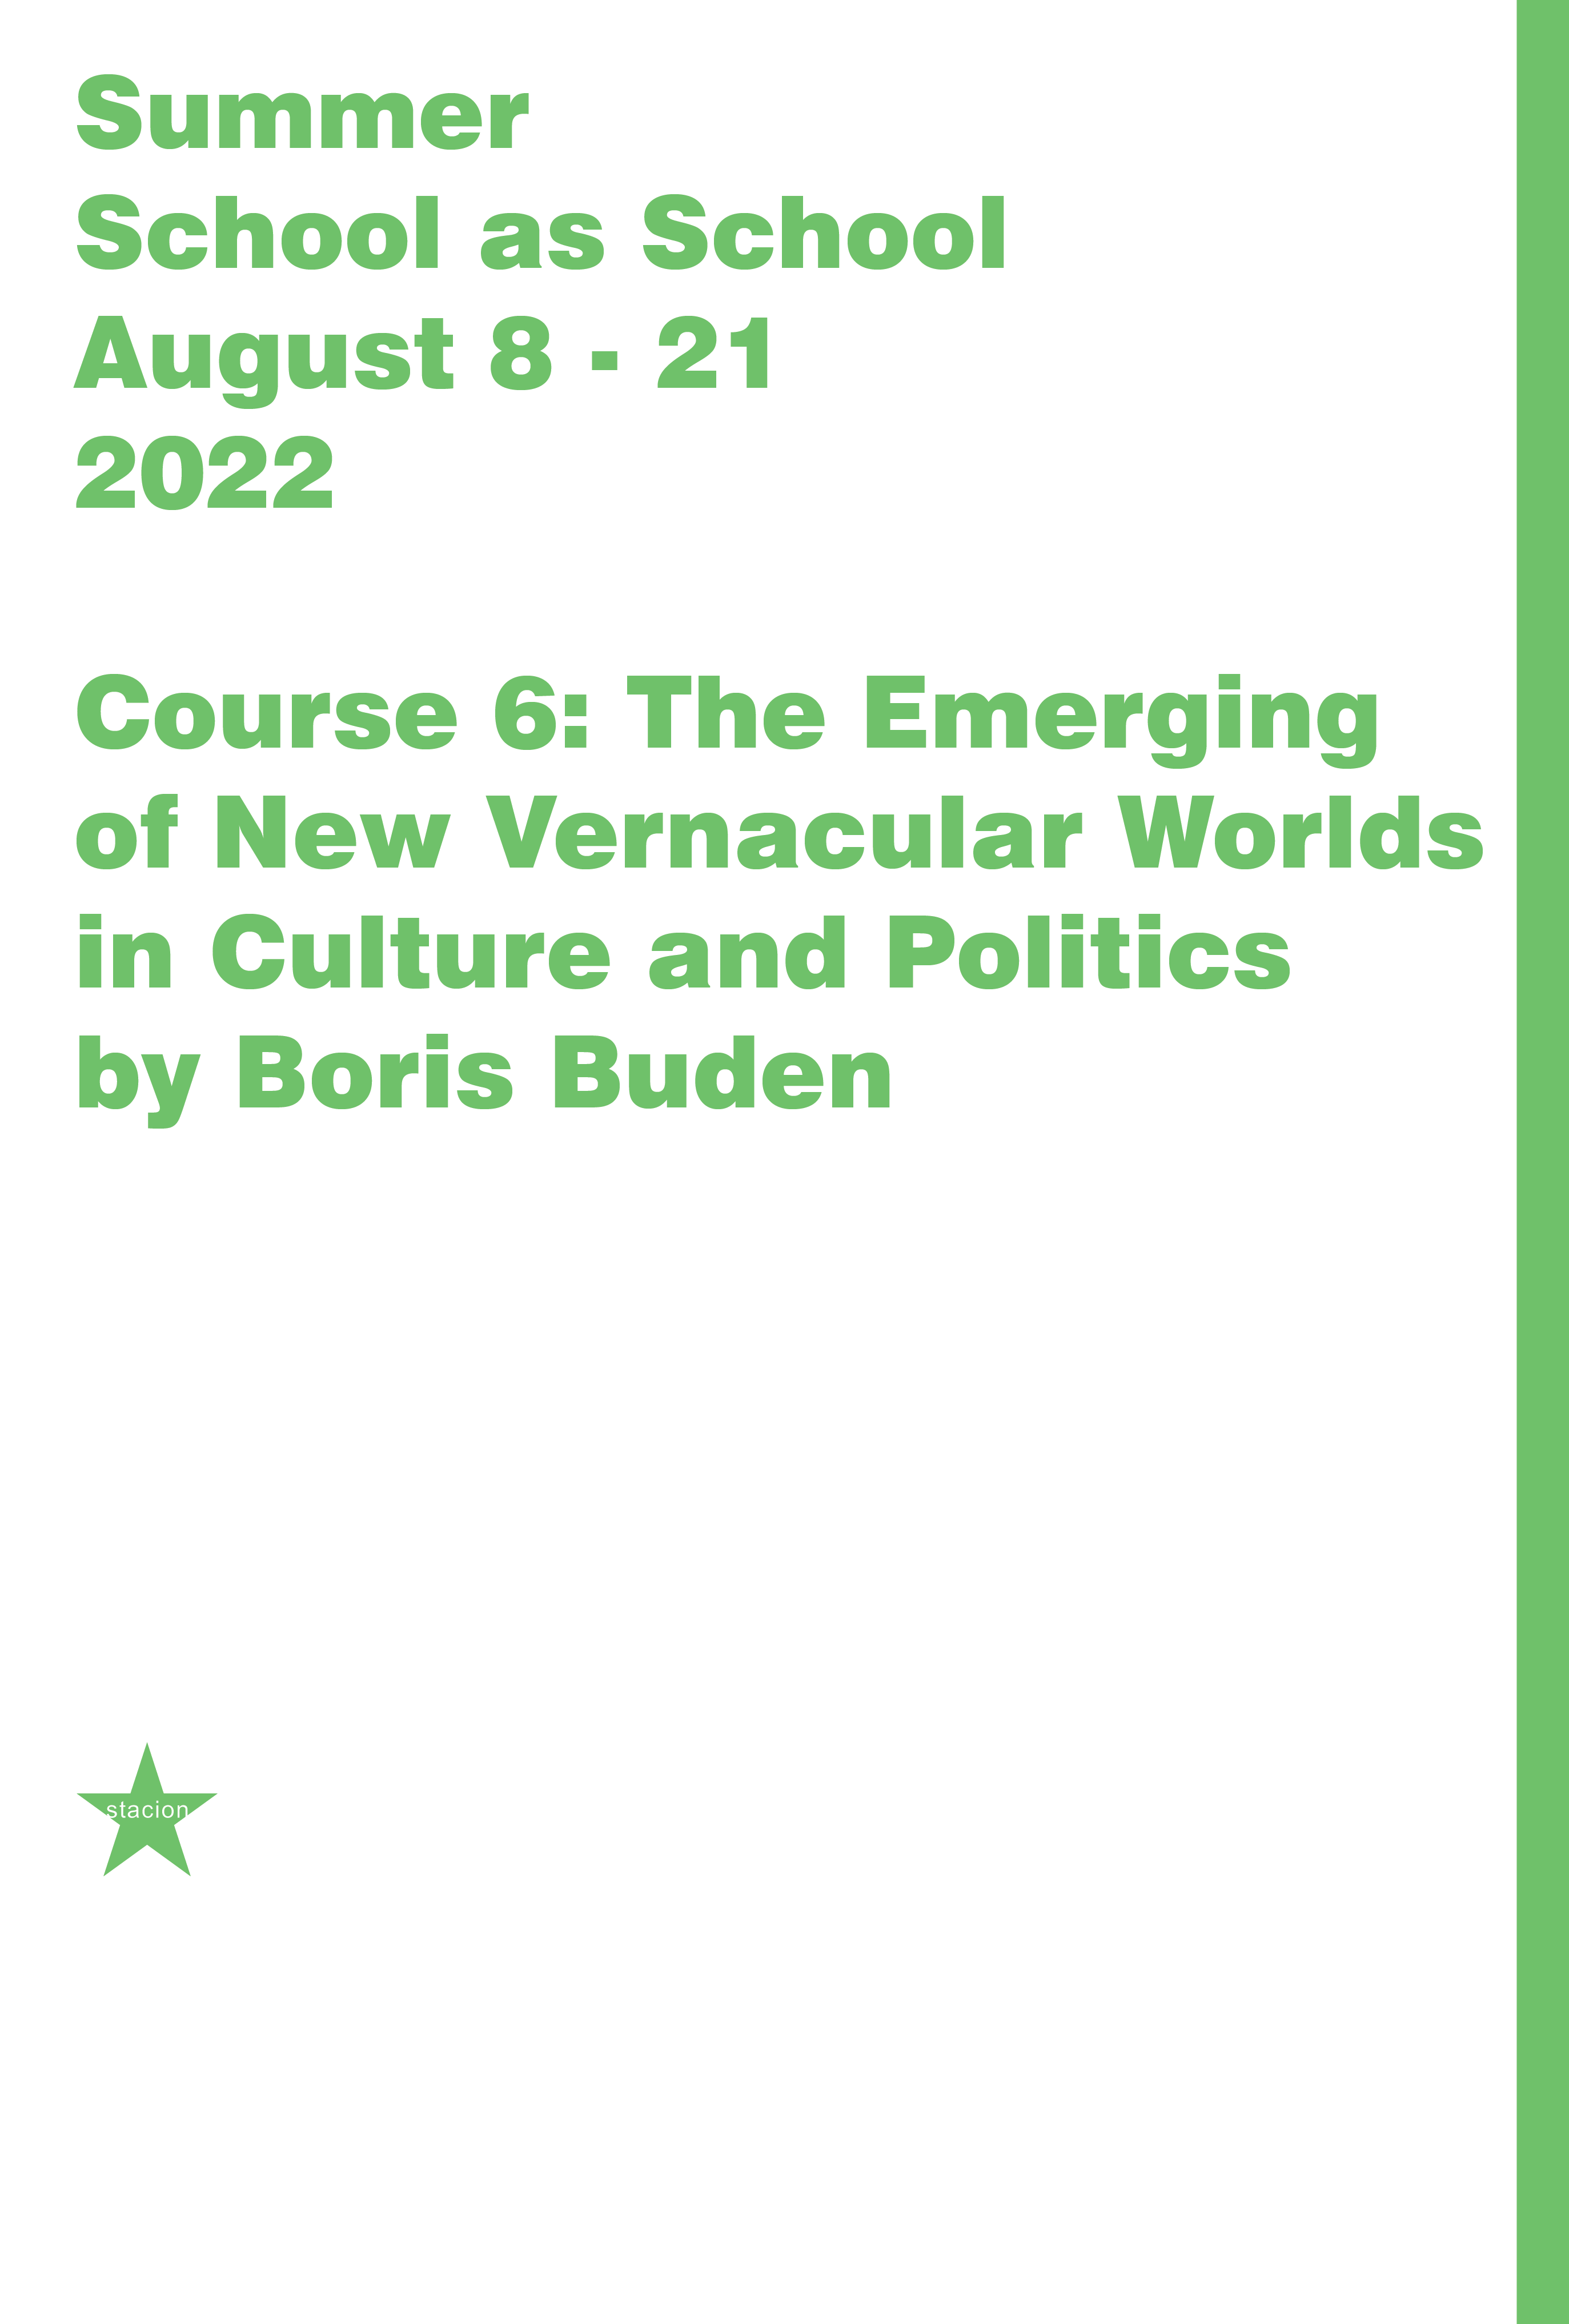 Course 6: The Emerging of New Vernacular Worlds in Culture and Politics